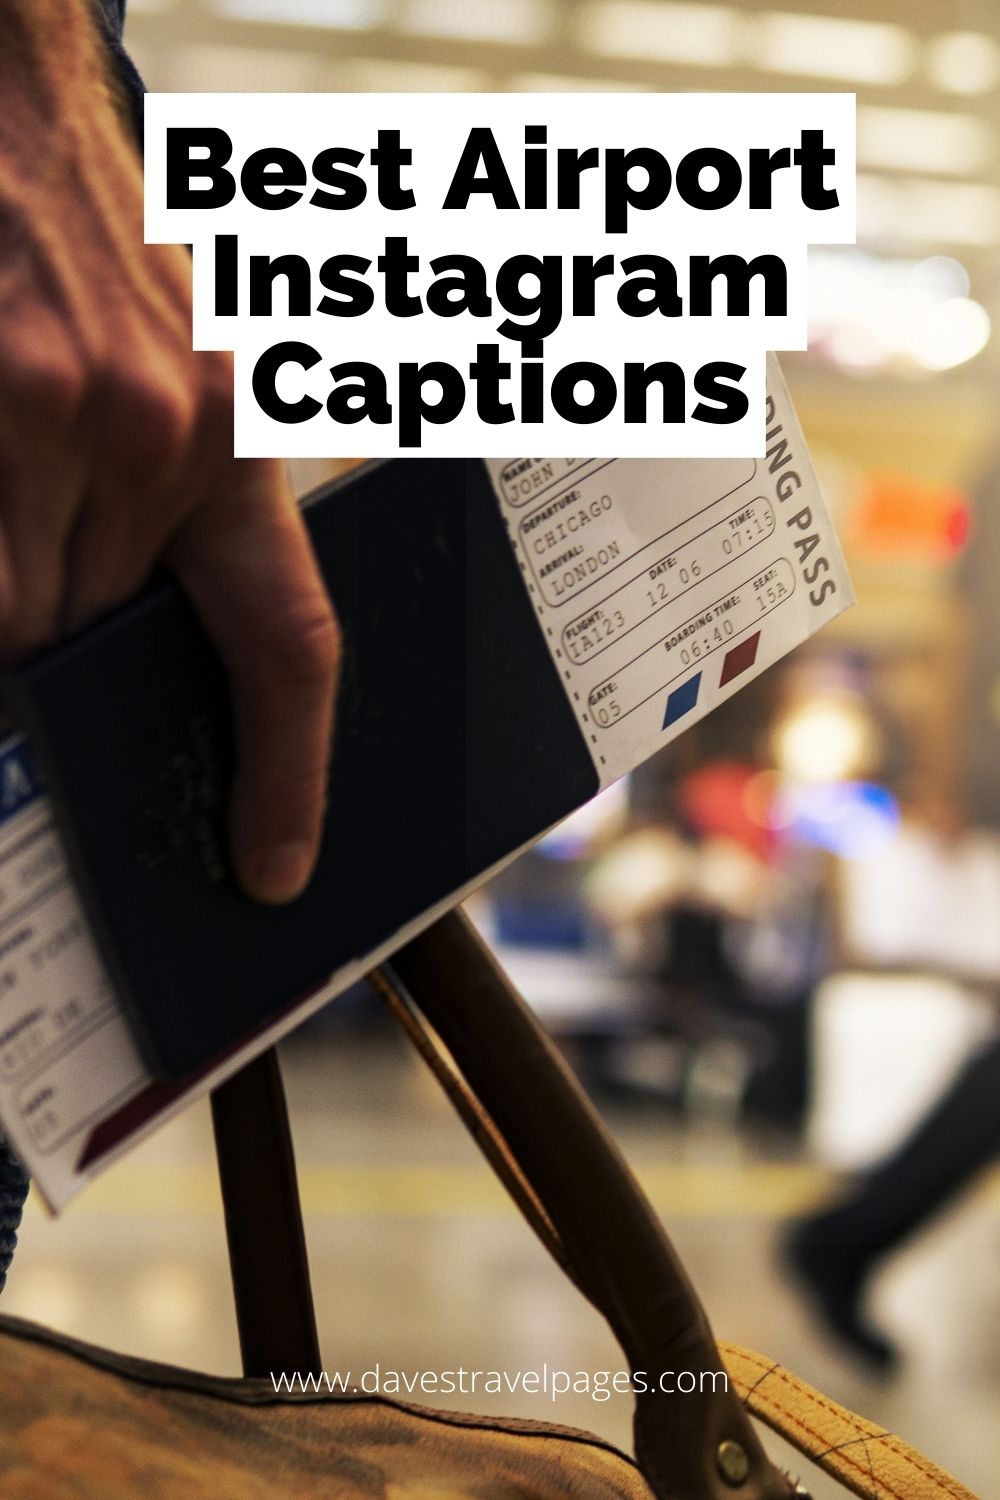 Instagram Captions About Airports